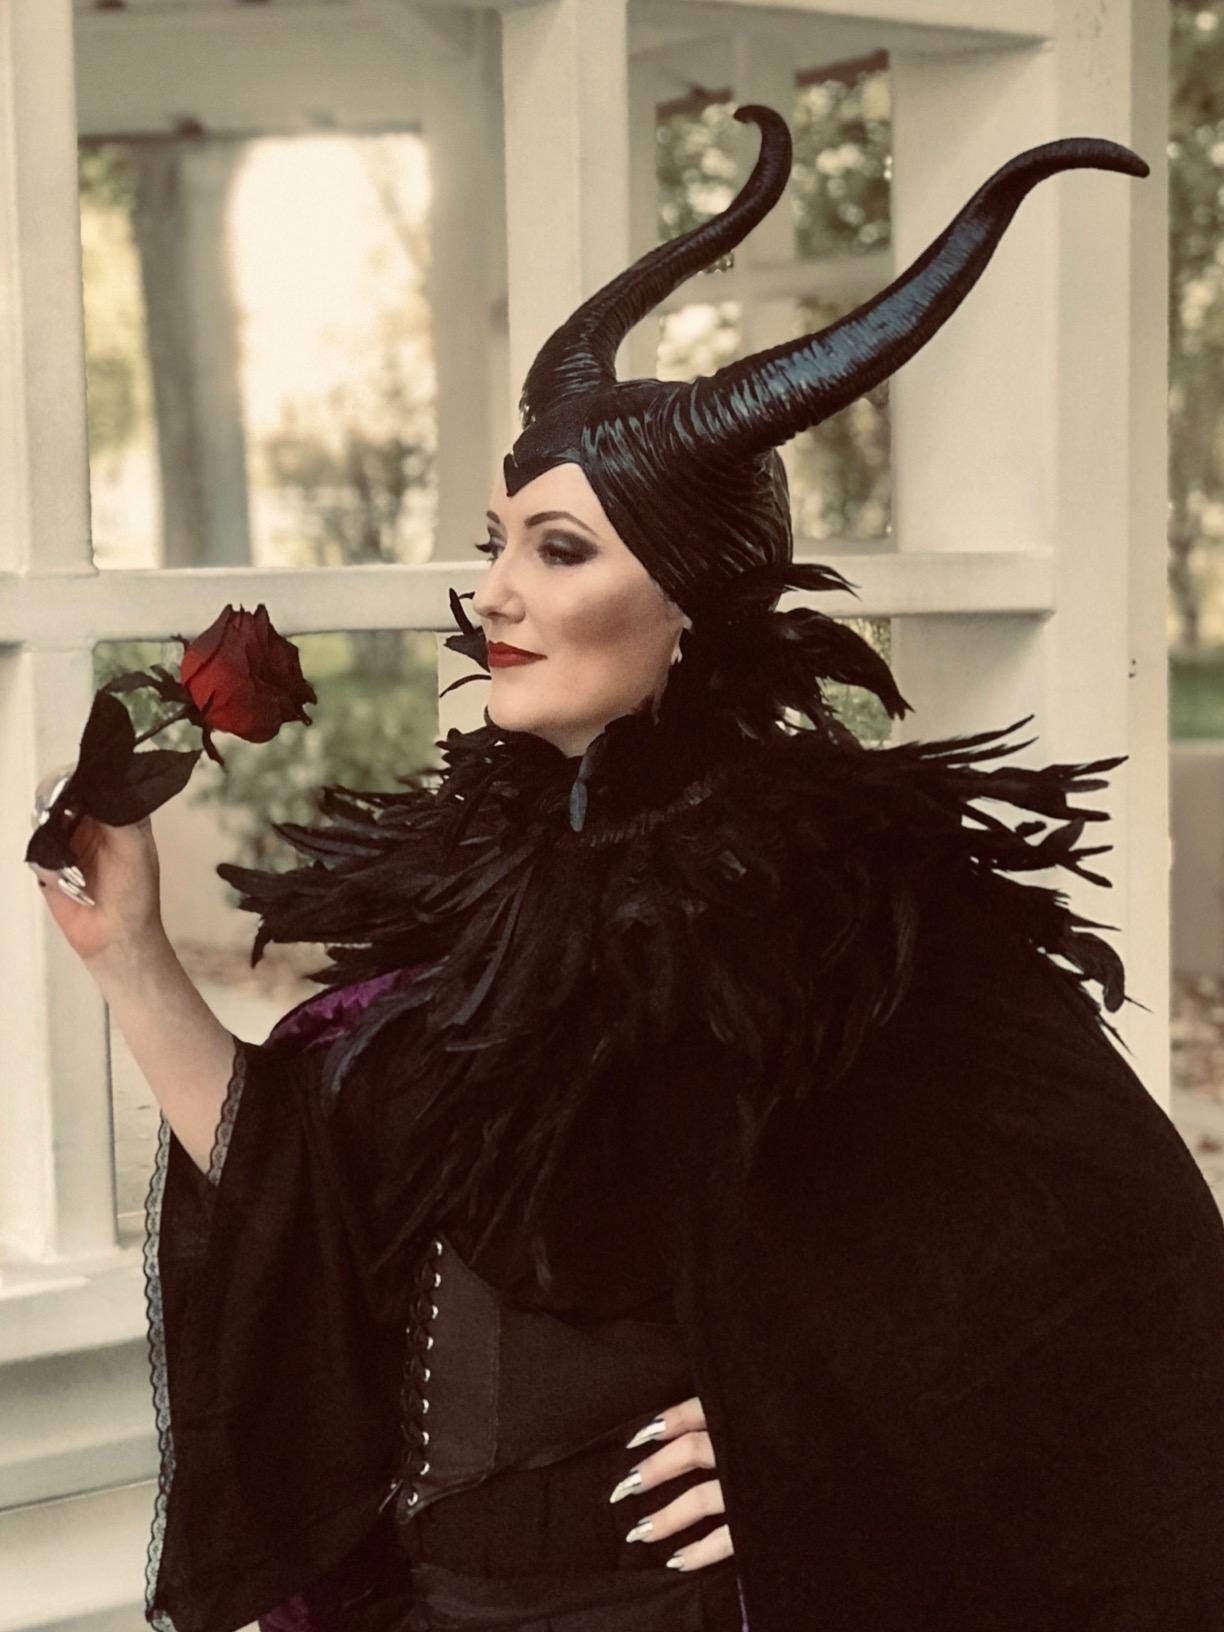 HOMELEX Gothic Black Crow Costume Feather Cape Shawl with Maleficent Horns Cosplay Set